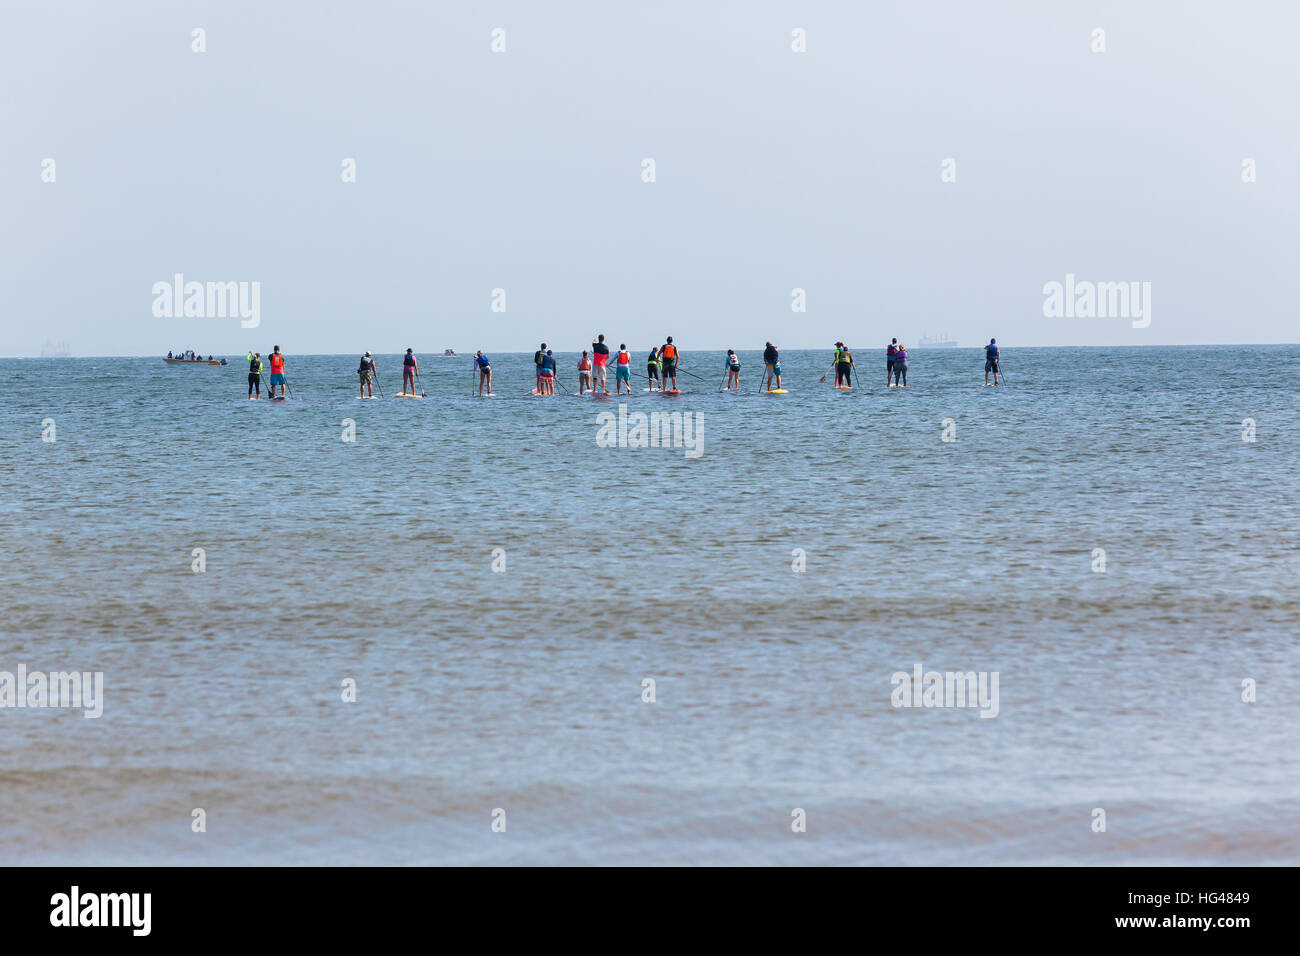 Ocean beach stand up paddlers men women on boards paddling outing on seas water Stock Photo